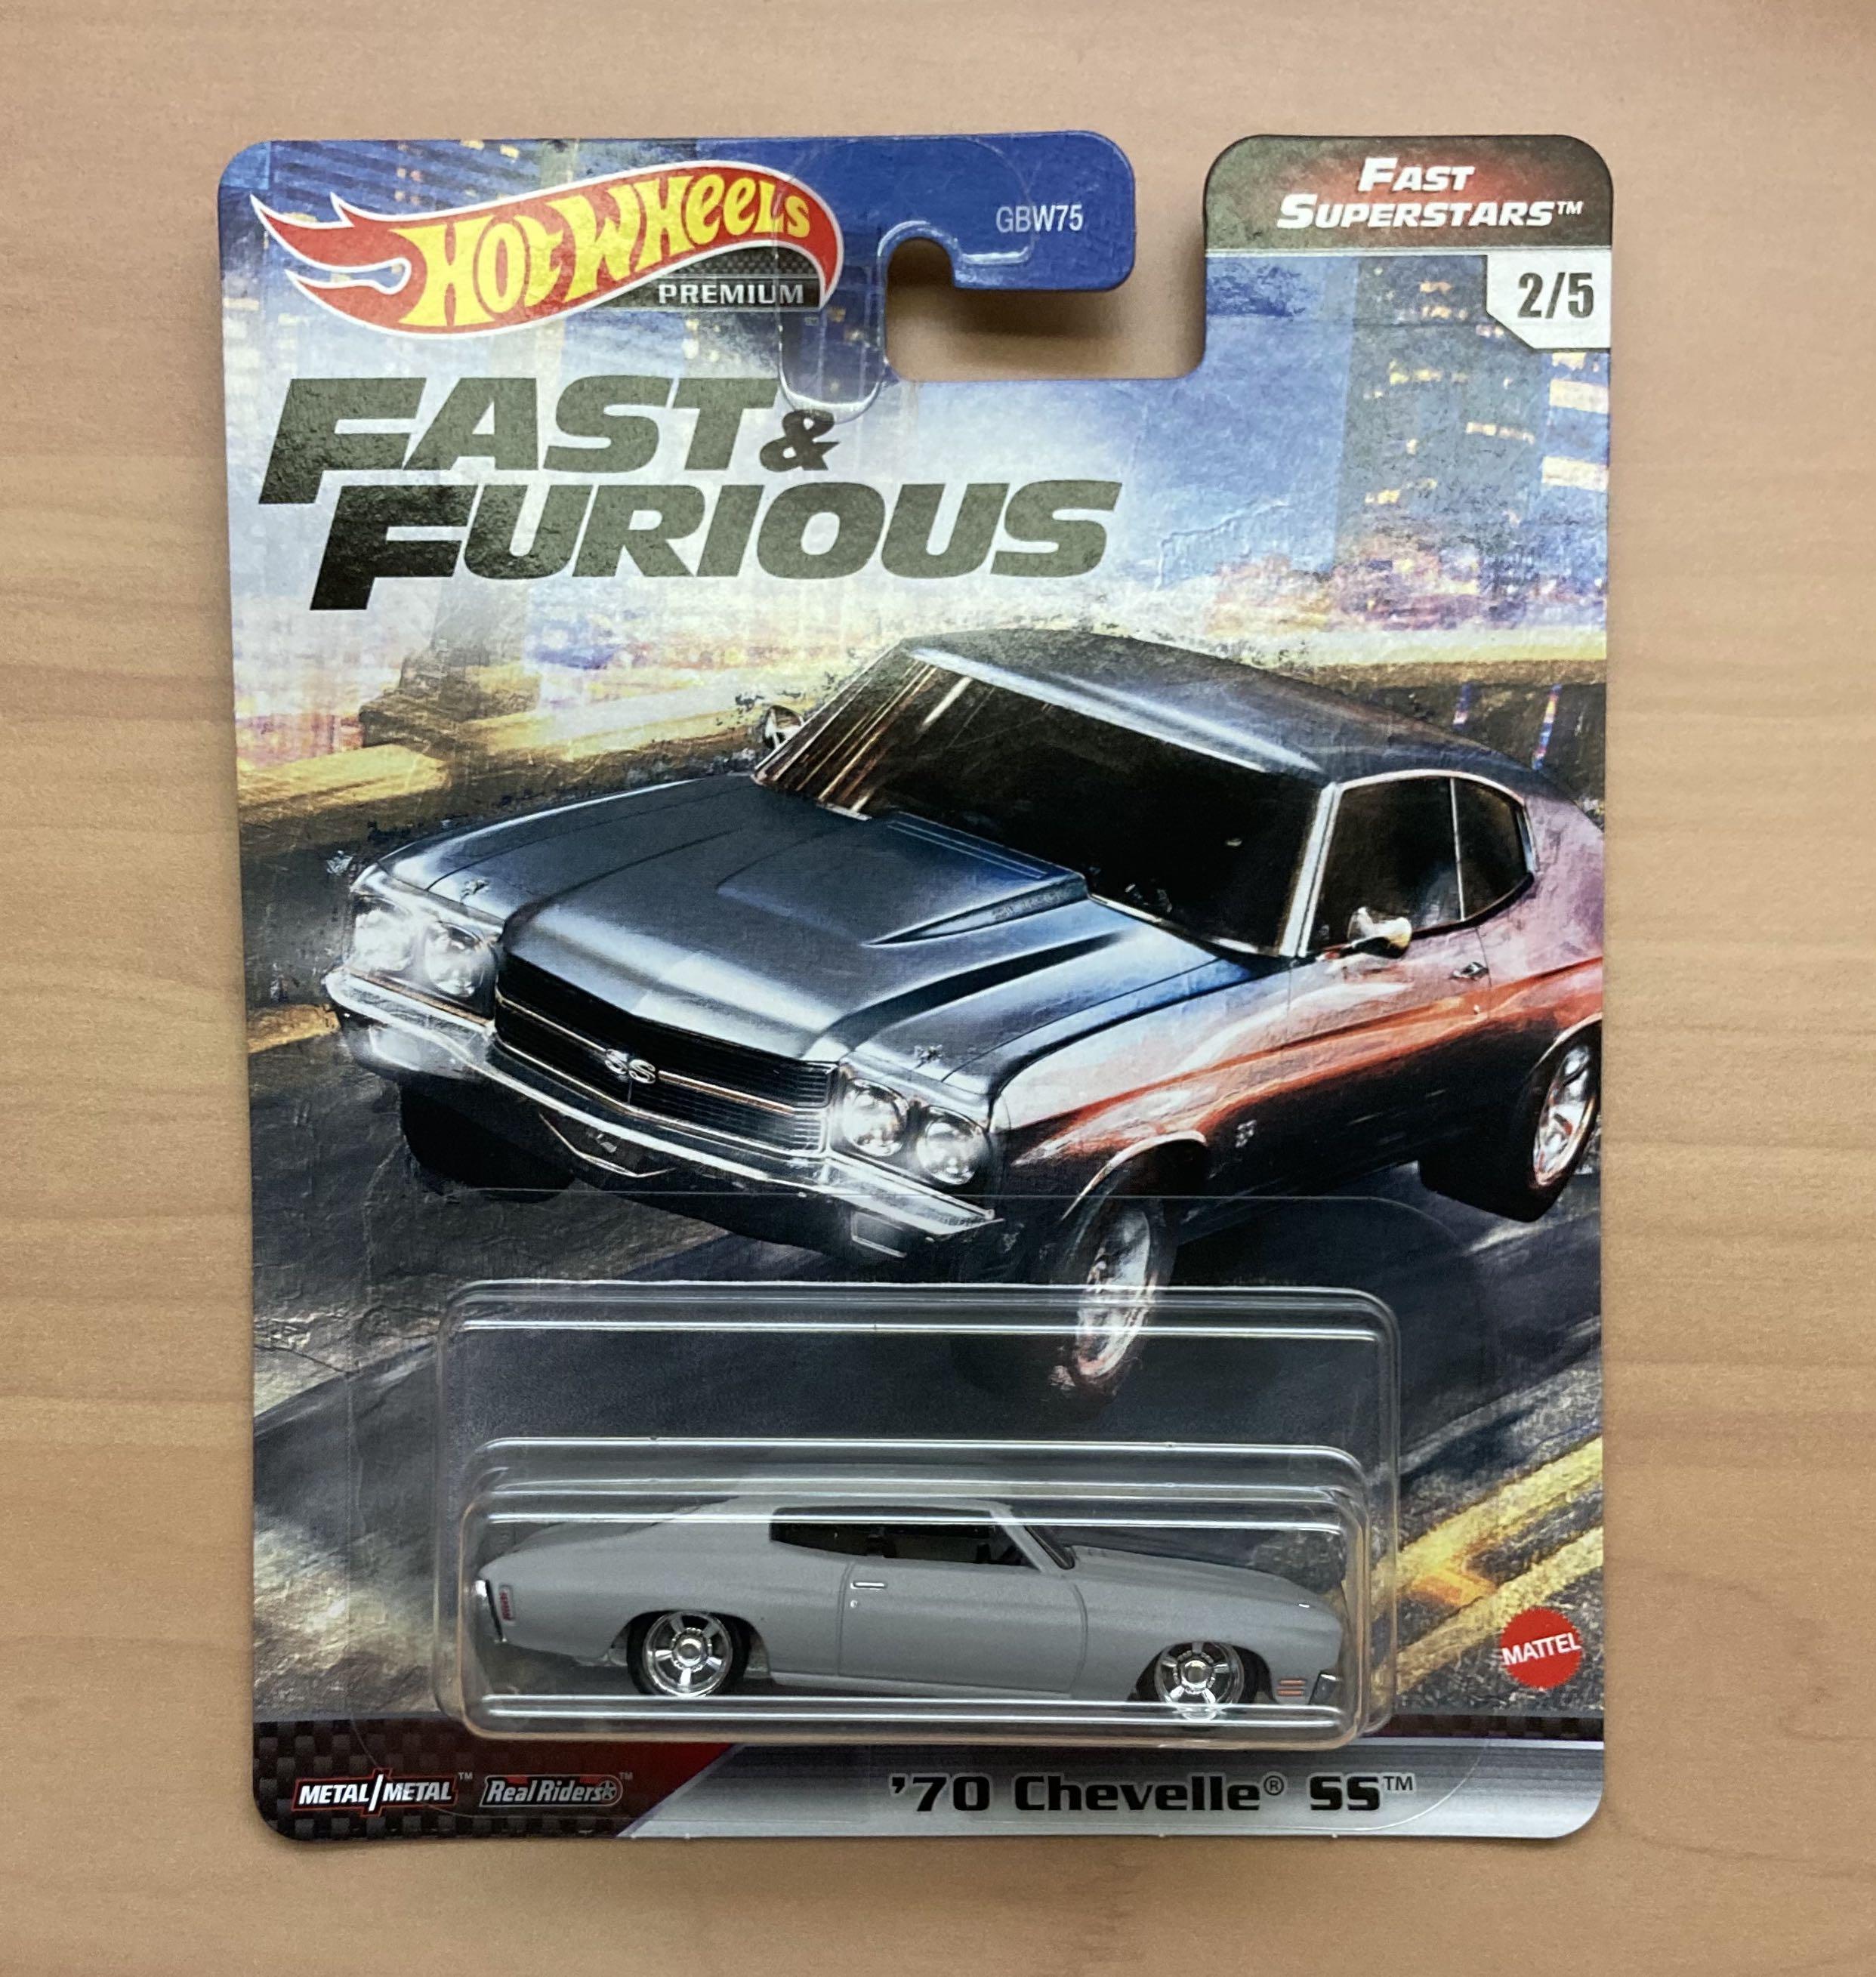 Lot of 2 ‘68 Chevy Nova ‘70 Chevelle SS Fast & Furious A86 HOT WHEELS 